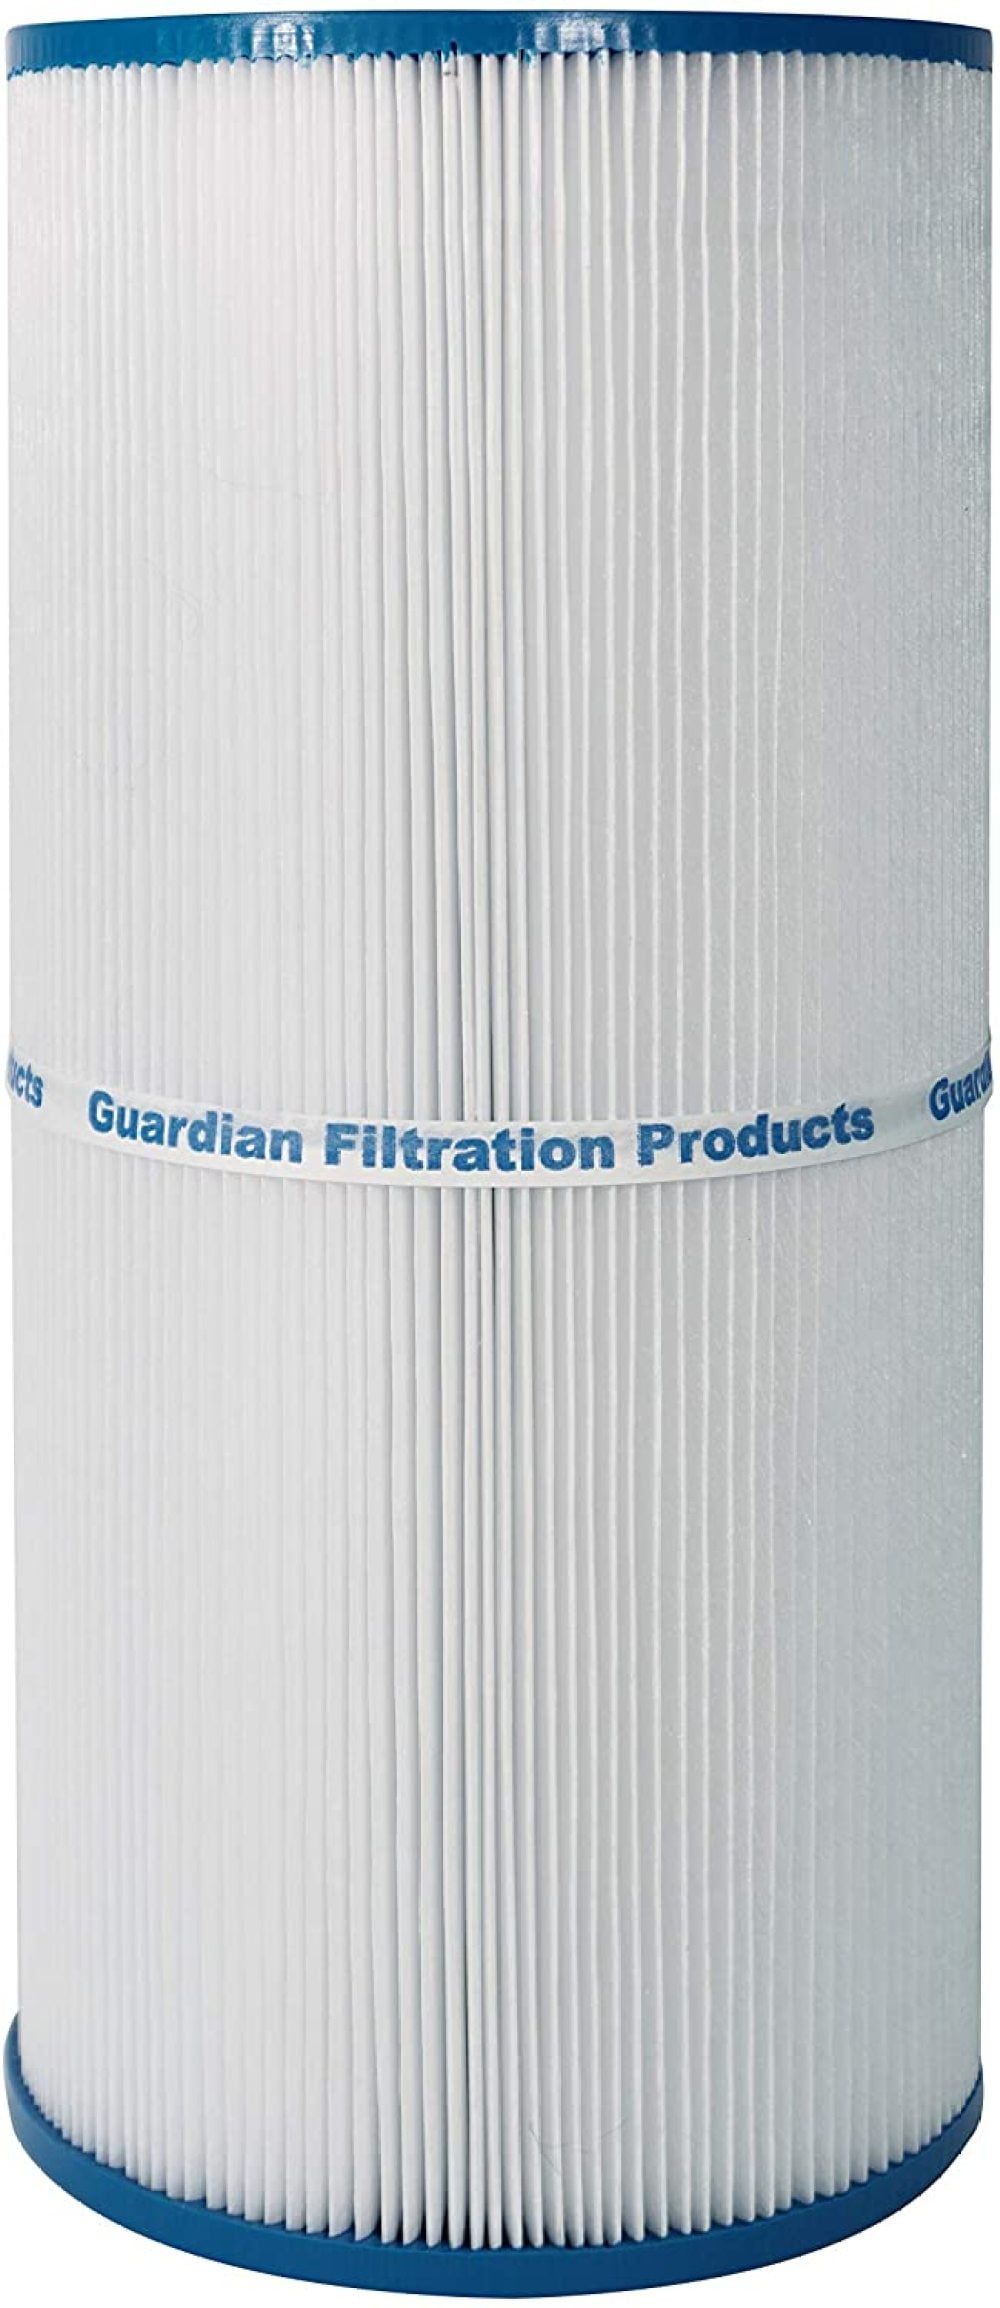 Hot Tub Spa Filter Replacement Filter for Filbur FC-3921 Limelight Hot Tub Prism & Beam -78161 Guardian Filtration Limelight Watkins Spa Filter Cartridge 2018+ Pulse Flash Flair 